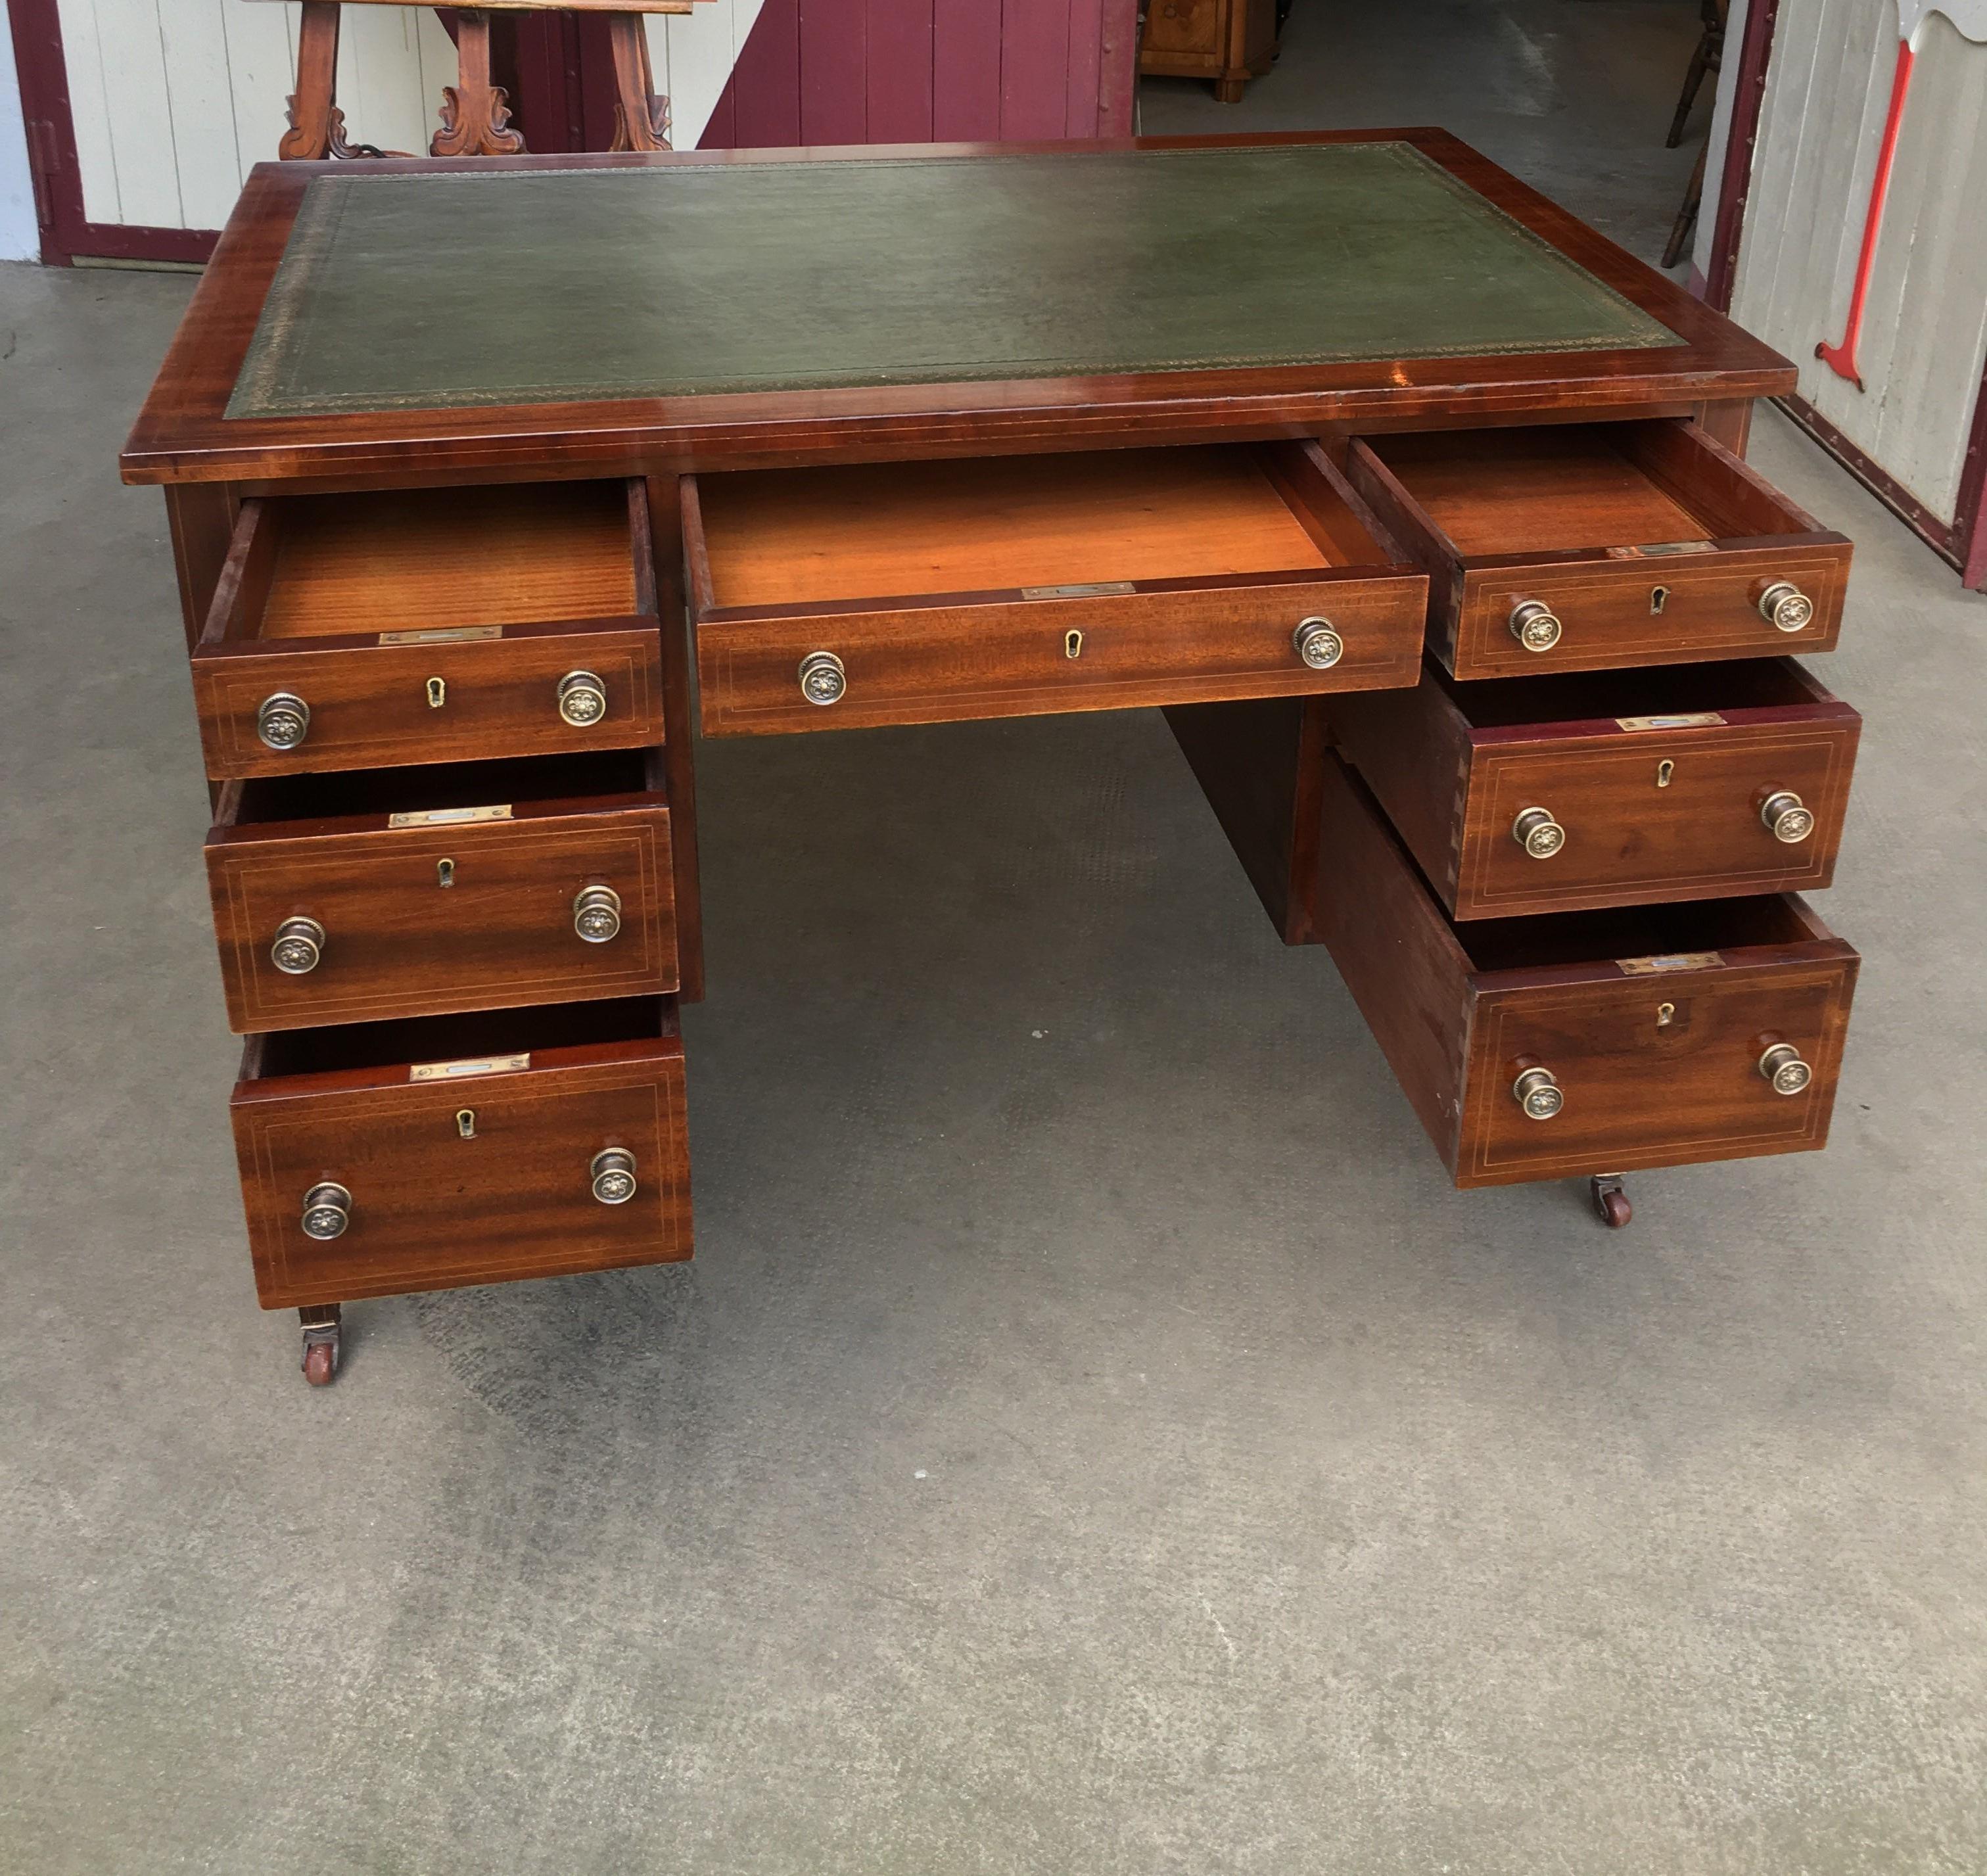 This is a mahogany desk from circa 1914. The writing area is equipped with a leather pad and a gold edge. Seven drawers offer a lot of storage space into the piece. Original brass emblem and buttons are located on the front and back. The whole piece